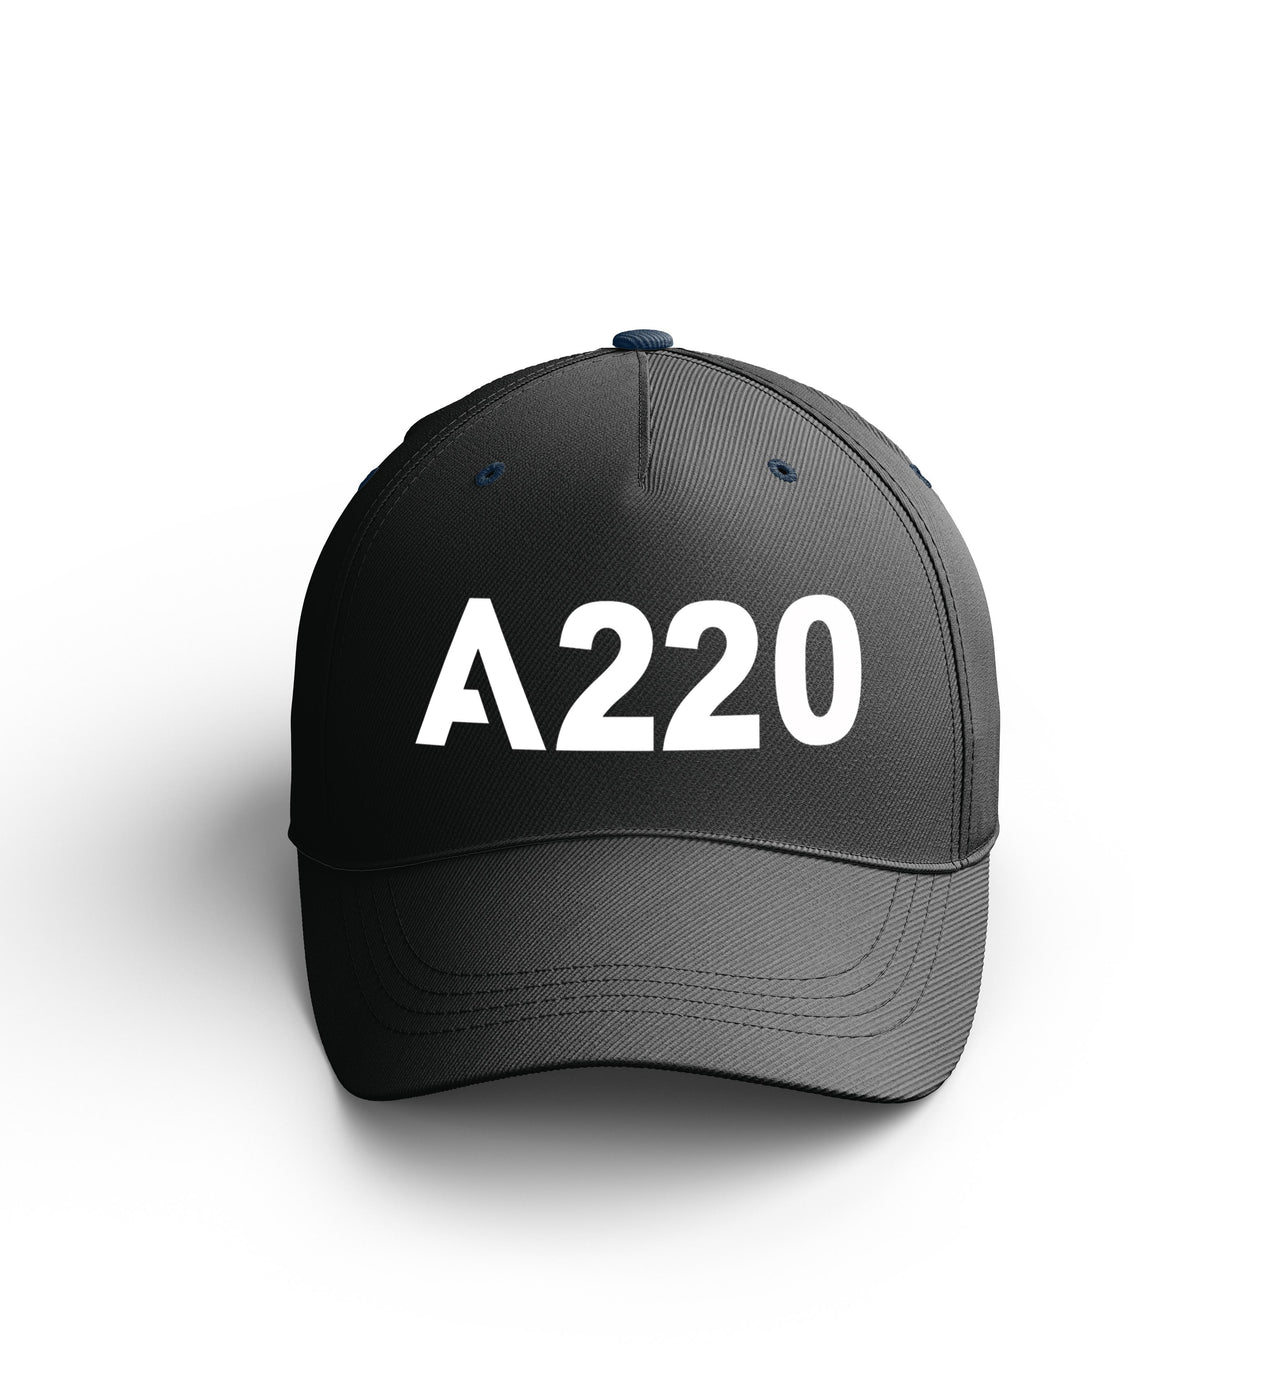 Customizable Name & A220 Flat Text Embroidered Hats